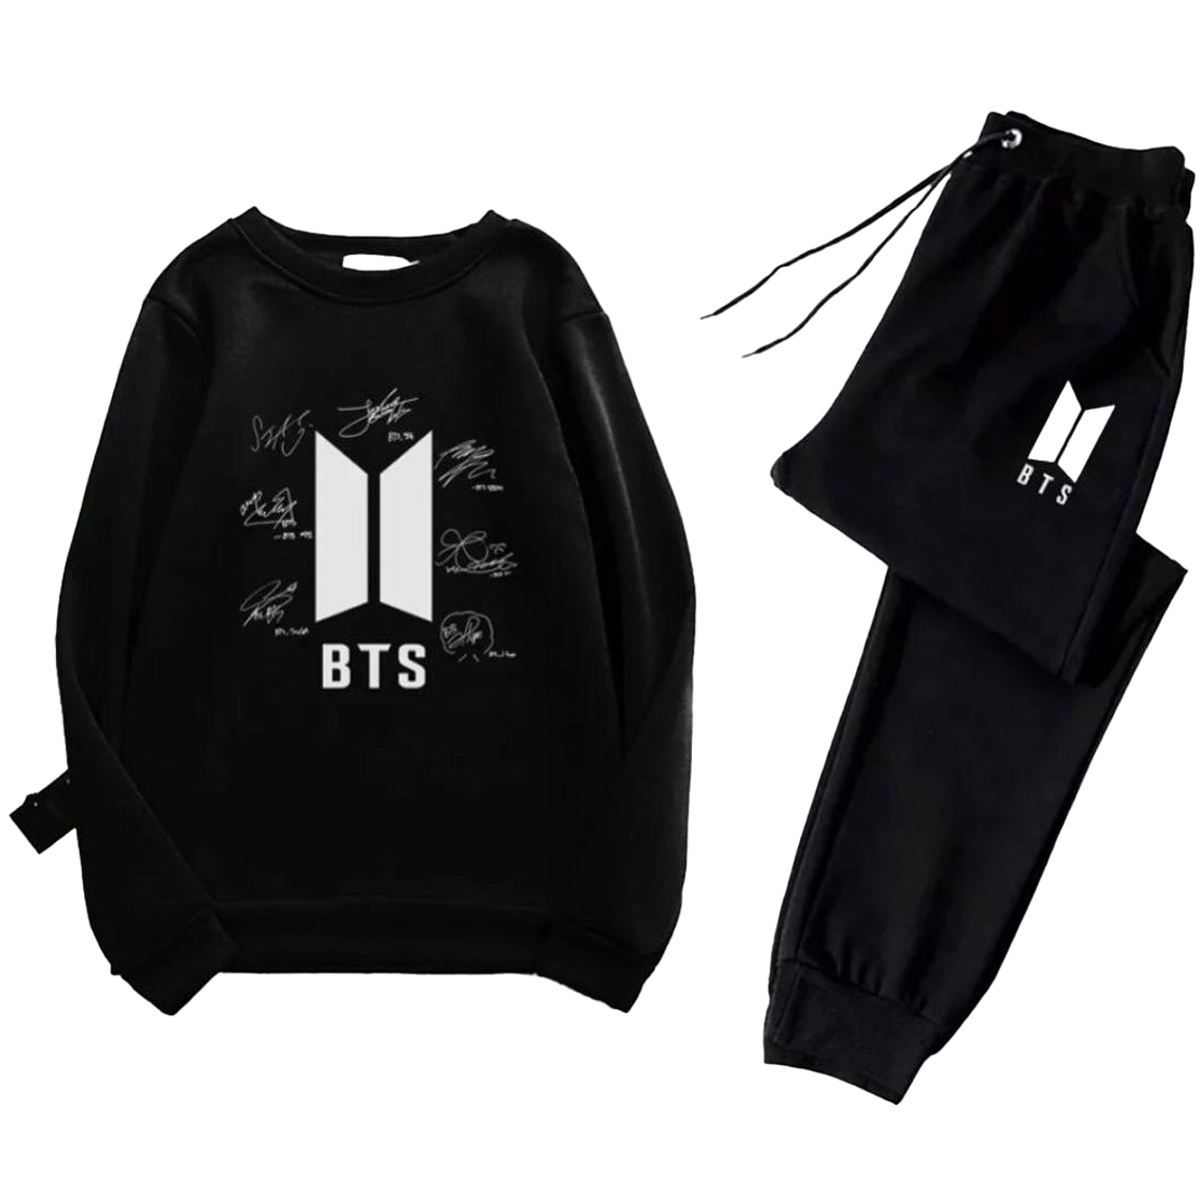 Buy Tracksuit BTS SIGN Print Thick & Fleece Fabric Sweatshirt with trouser  for Winter sweatshirt Fashion Wear tracksuit for Women / Girls at Lowest  Price in Pakistan